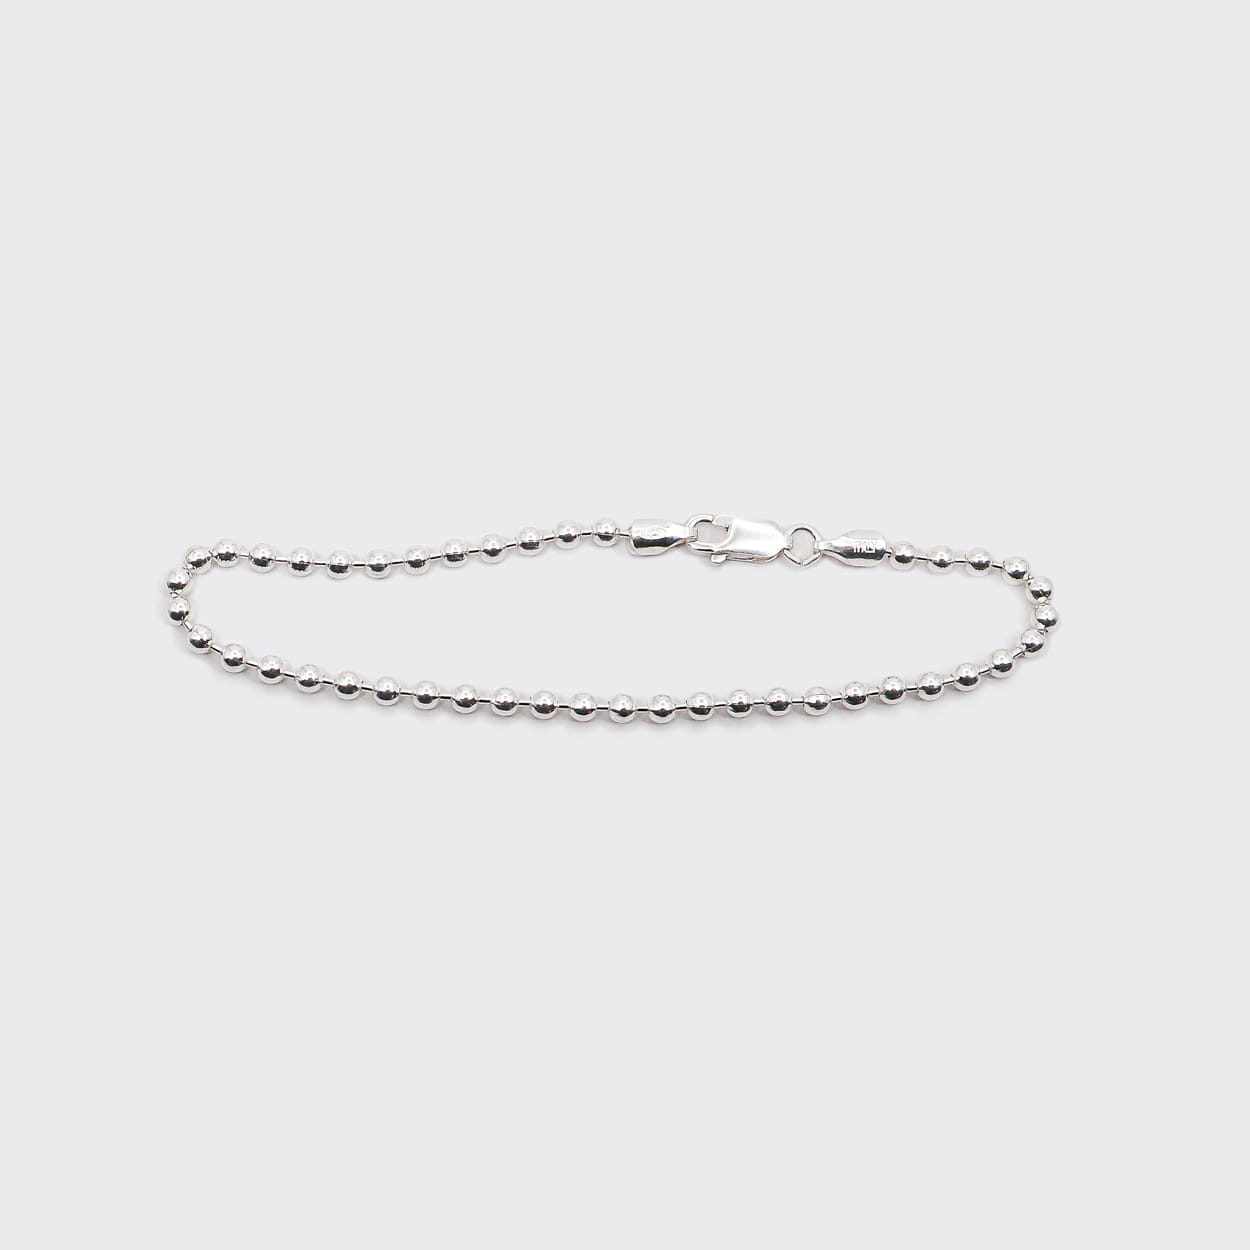 The beads bracelet is an elegant and unisex piece of jewelry, crafted in Italy and made of 925 Sterling Silver. Every jewelry is designed by Atelier Domingo's in France and is made to be worn by both men and women.